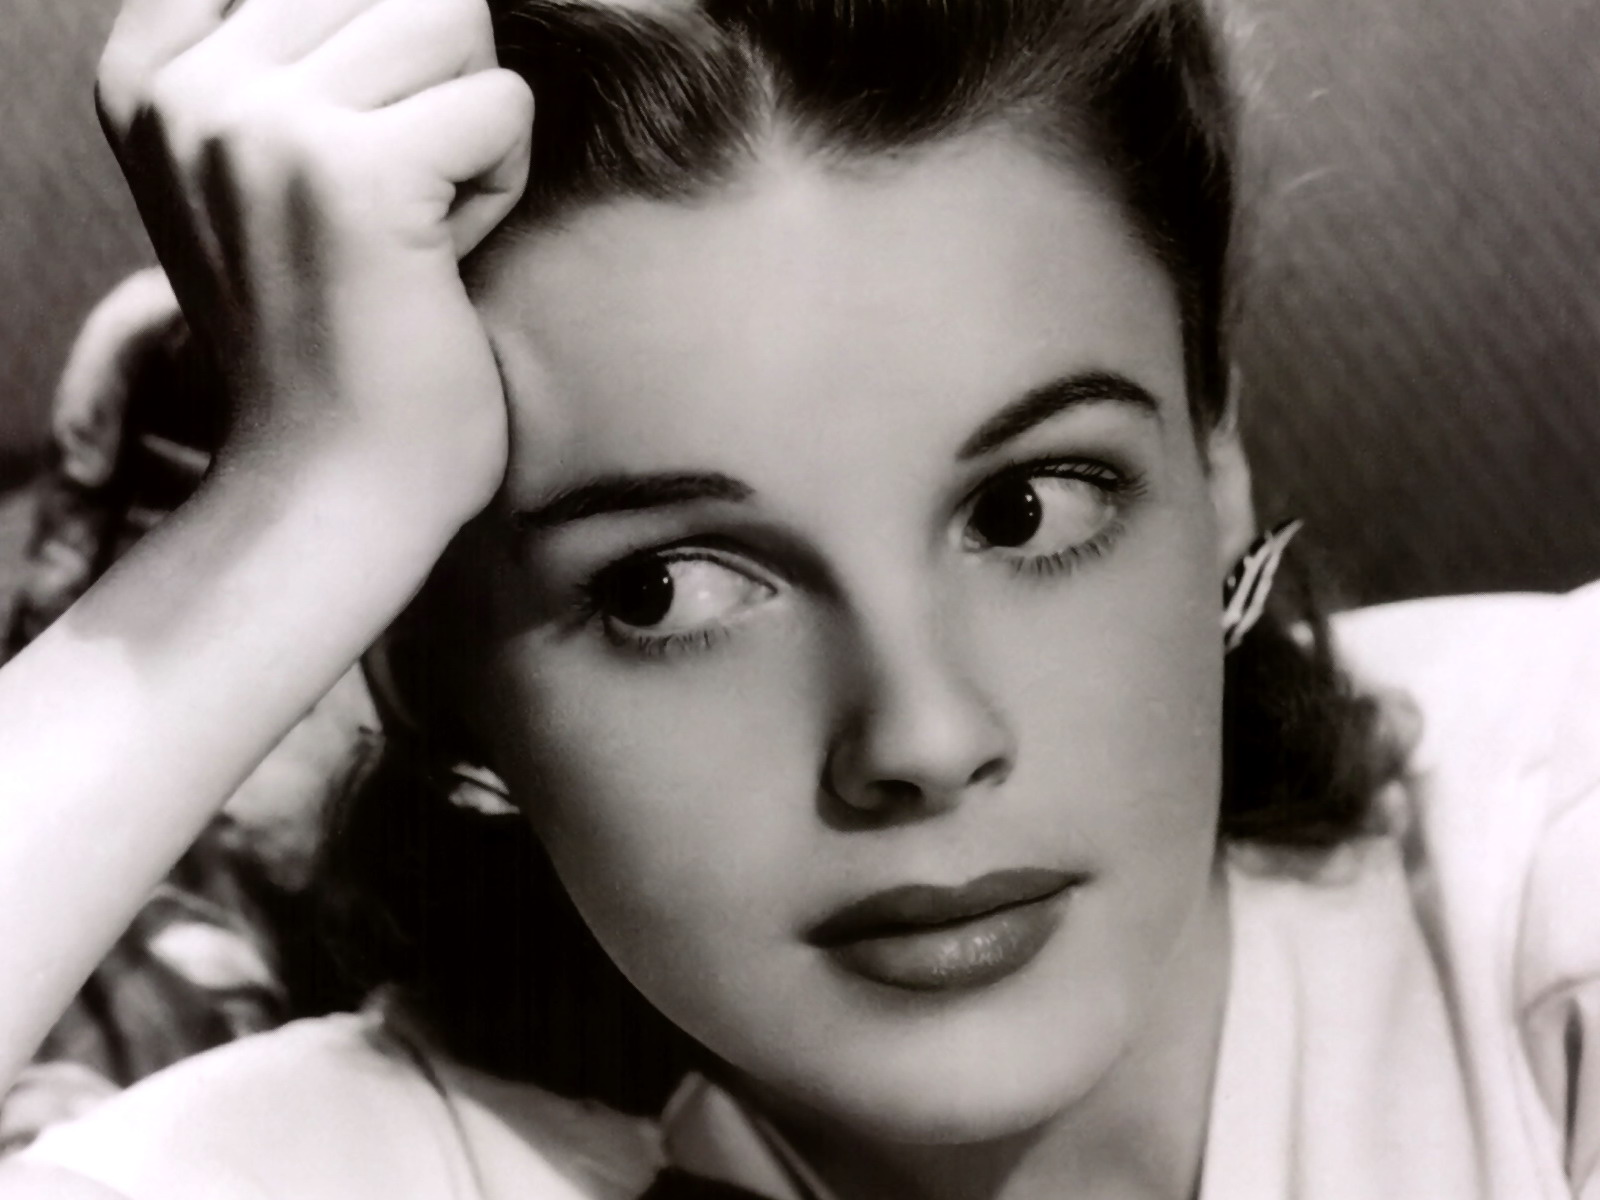 Just like the image of her fragile, unconventional beauty trapped within the glow of a tight spotlight, Judy Garland's life as a performer was surrounded by ...